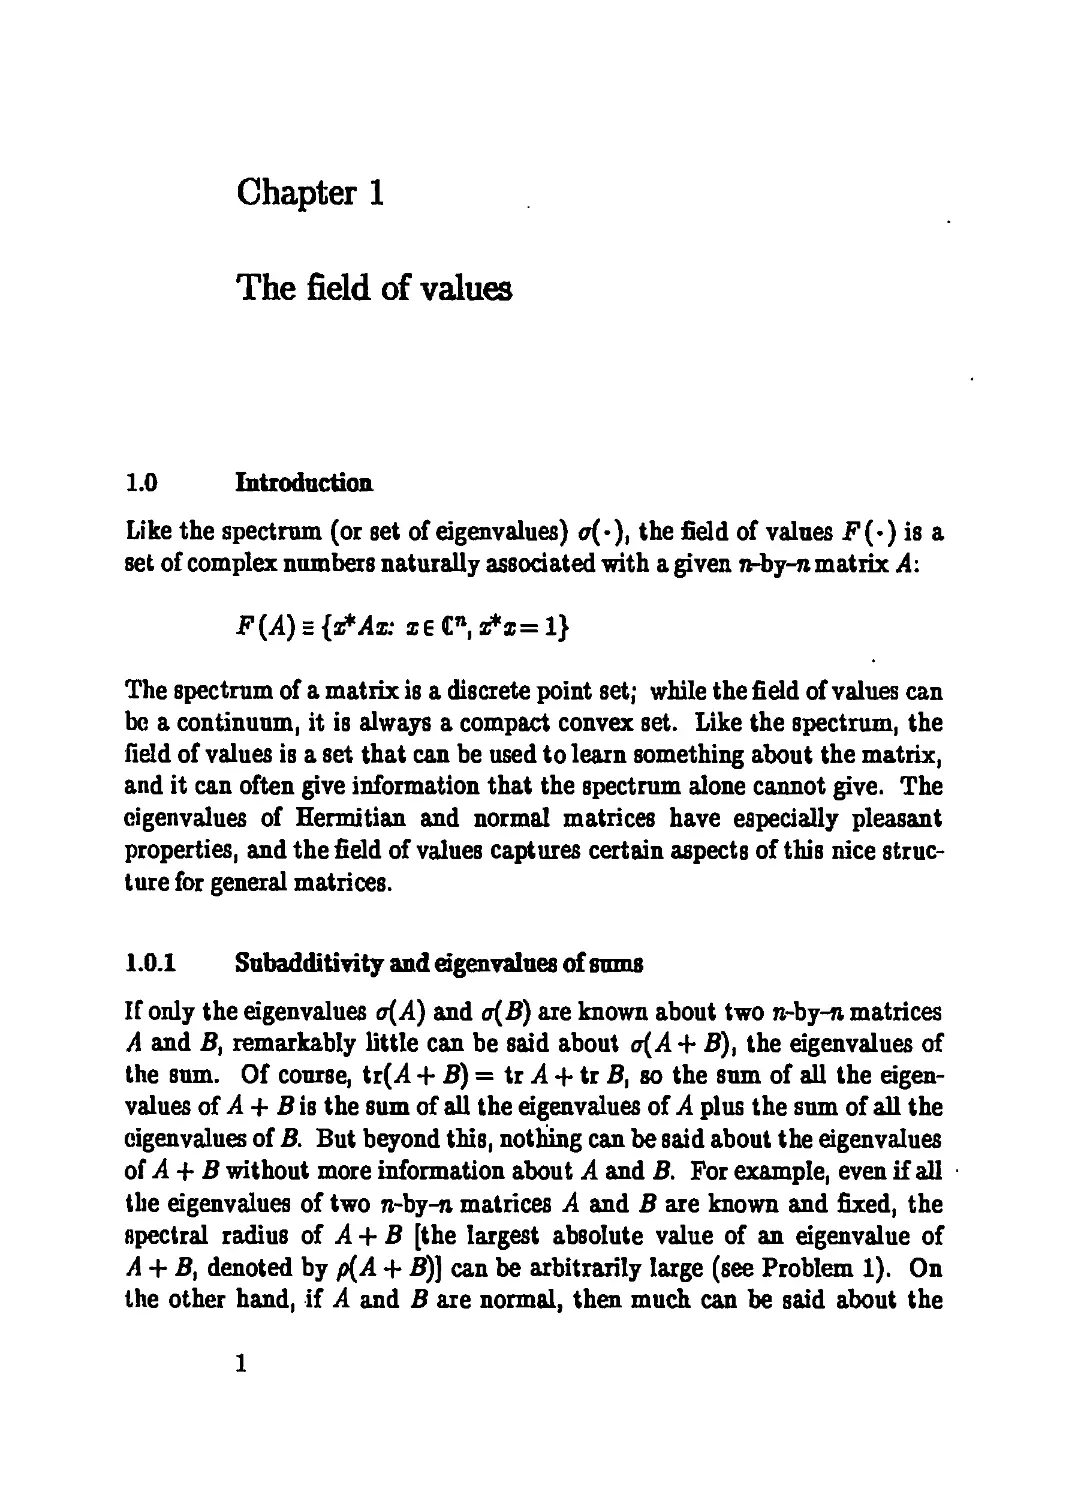 Chapter 1 The field of values